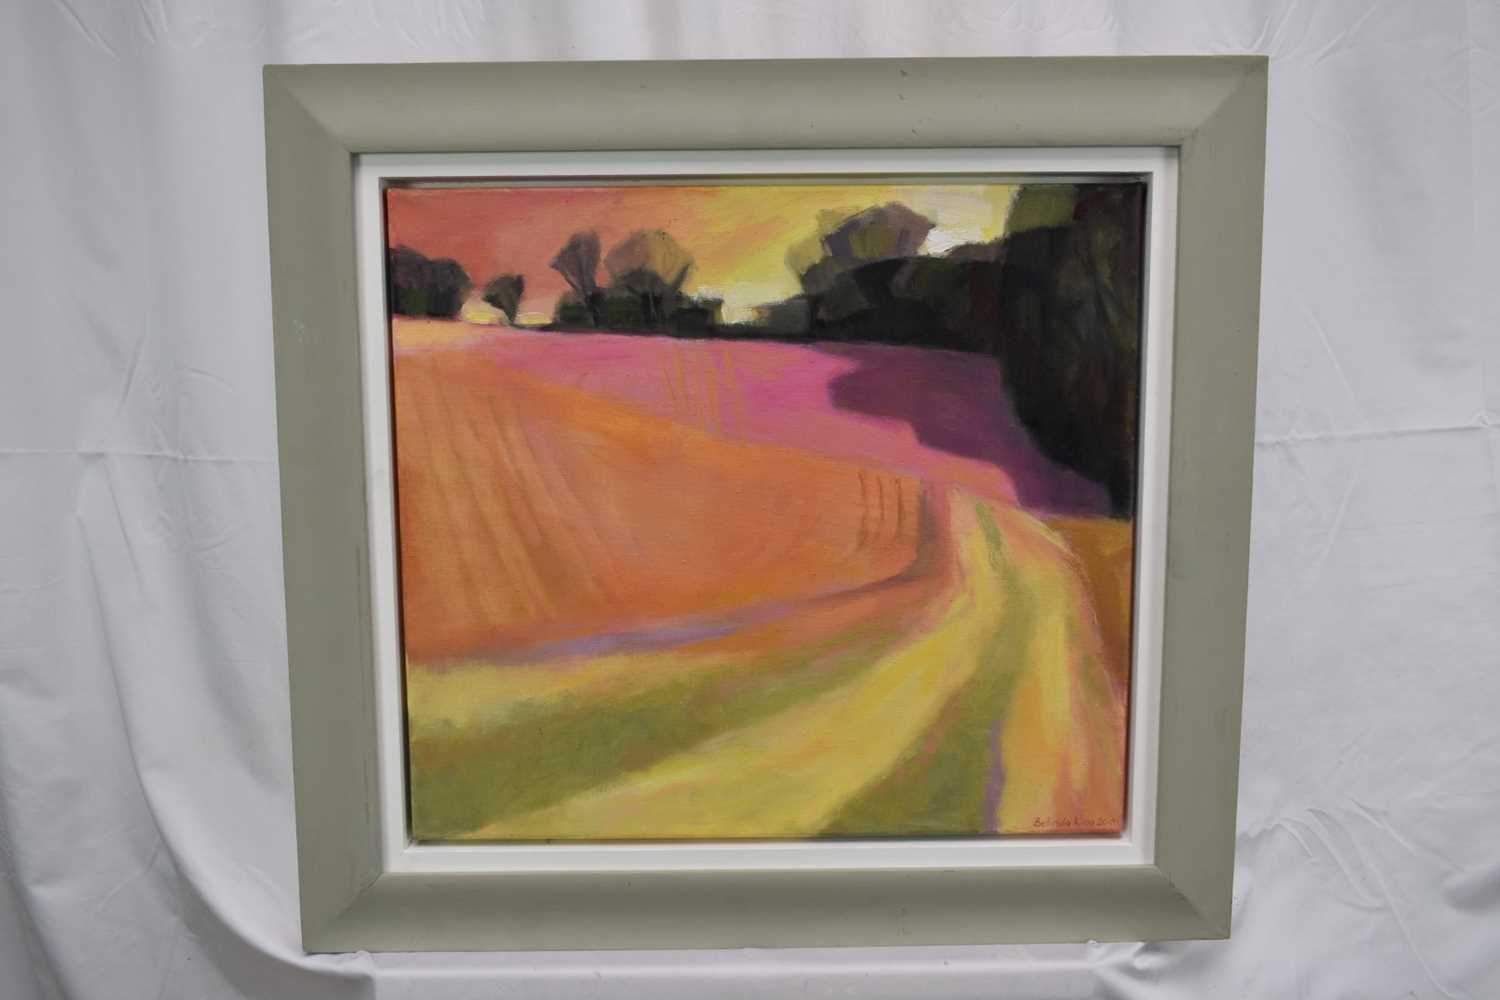 Belinda King (Contemporary) oil on canvas - Assington Field Edge, signed and dated 2010, label verso - Image 2 of 6